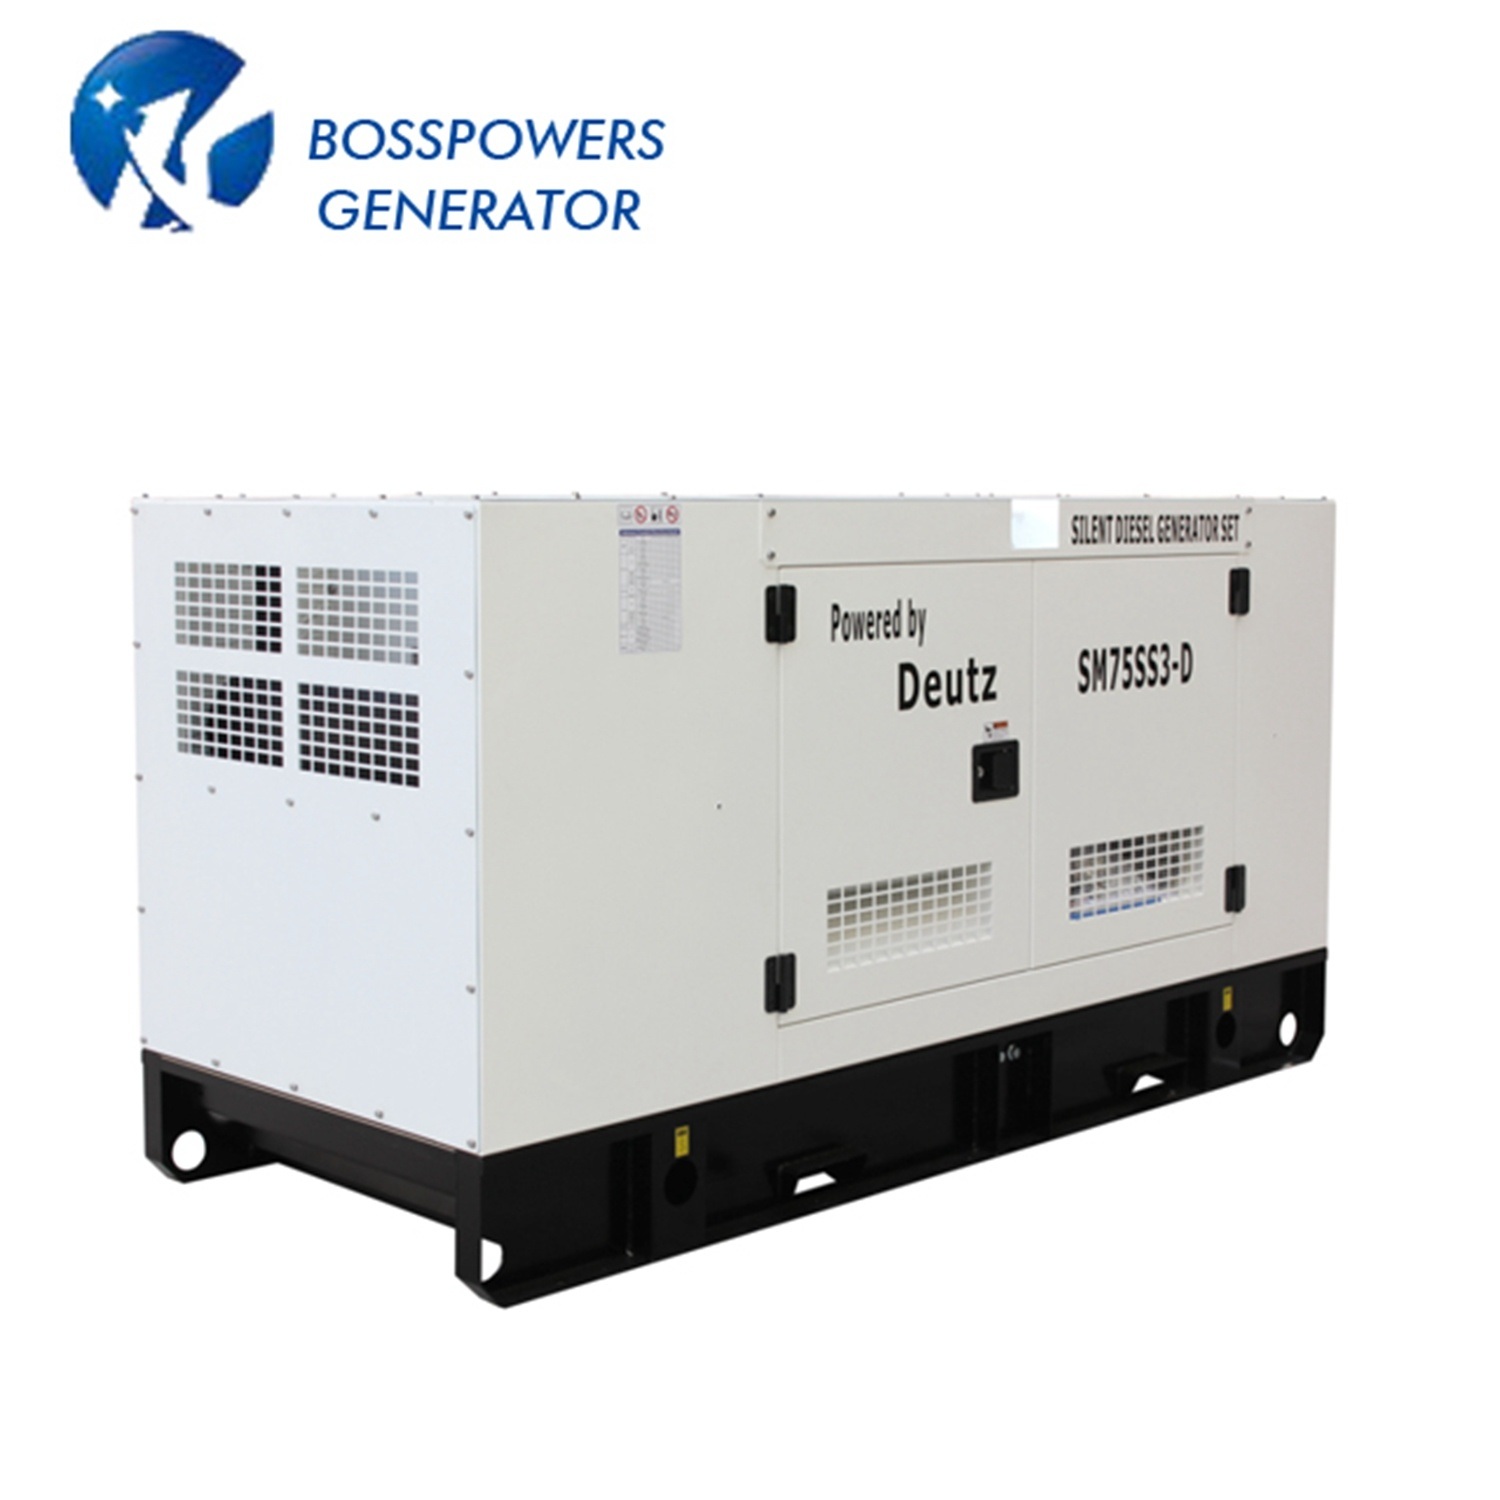 Water-Cooling Electric Start Diesel Generator Powered by Zh4105zd Ricardo Weifang